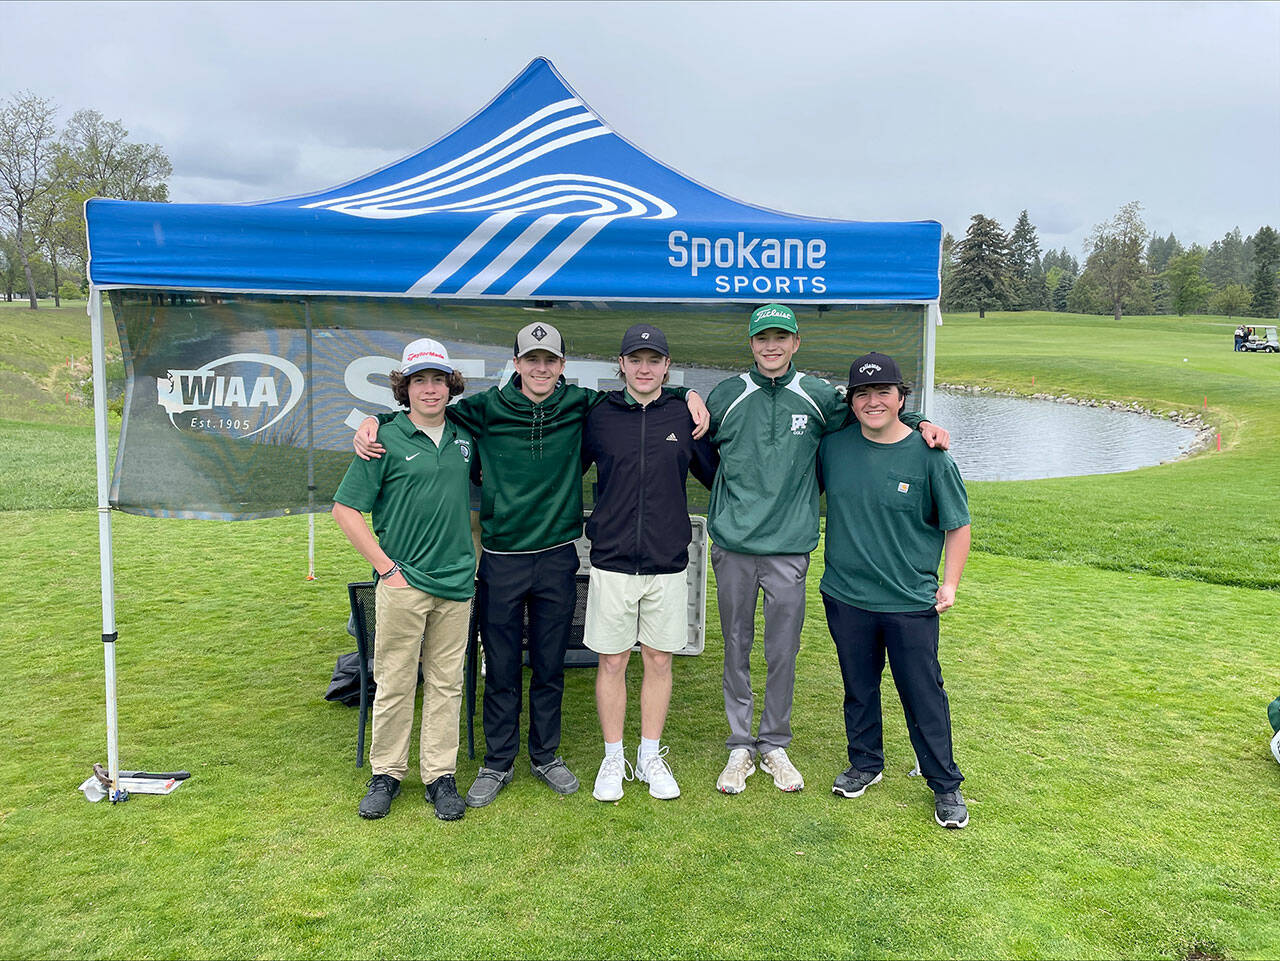 Bob Anderson/Port Angeles Golf The Port Angeles boys golf team from left, Sky Gelder, Austin Worthington, Reid Schmidt, Nate Anderson and Max Gagnon, recently competed at the Class 2A State Tournament at Liberty Lake Golf Course in the Spokane Valley. Anderson shot a 76 in his opening round and was looking for a high finish before a spring squall complicated matters for all players, dropping temperatures with cold rain and wind. He ended up earning 20th place.